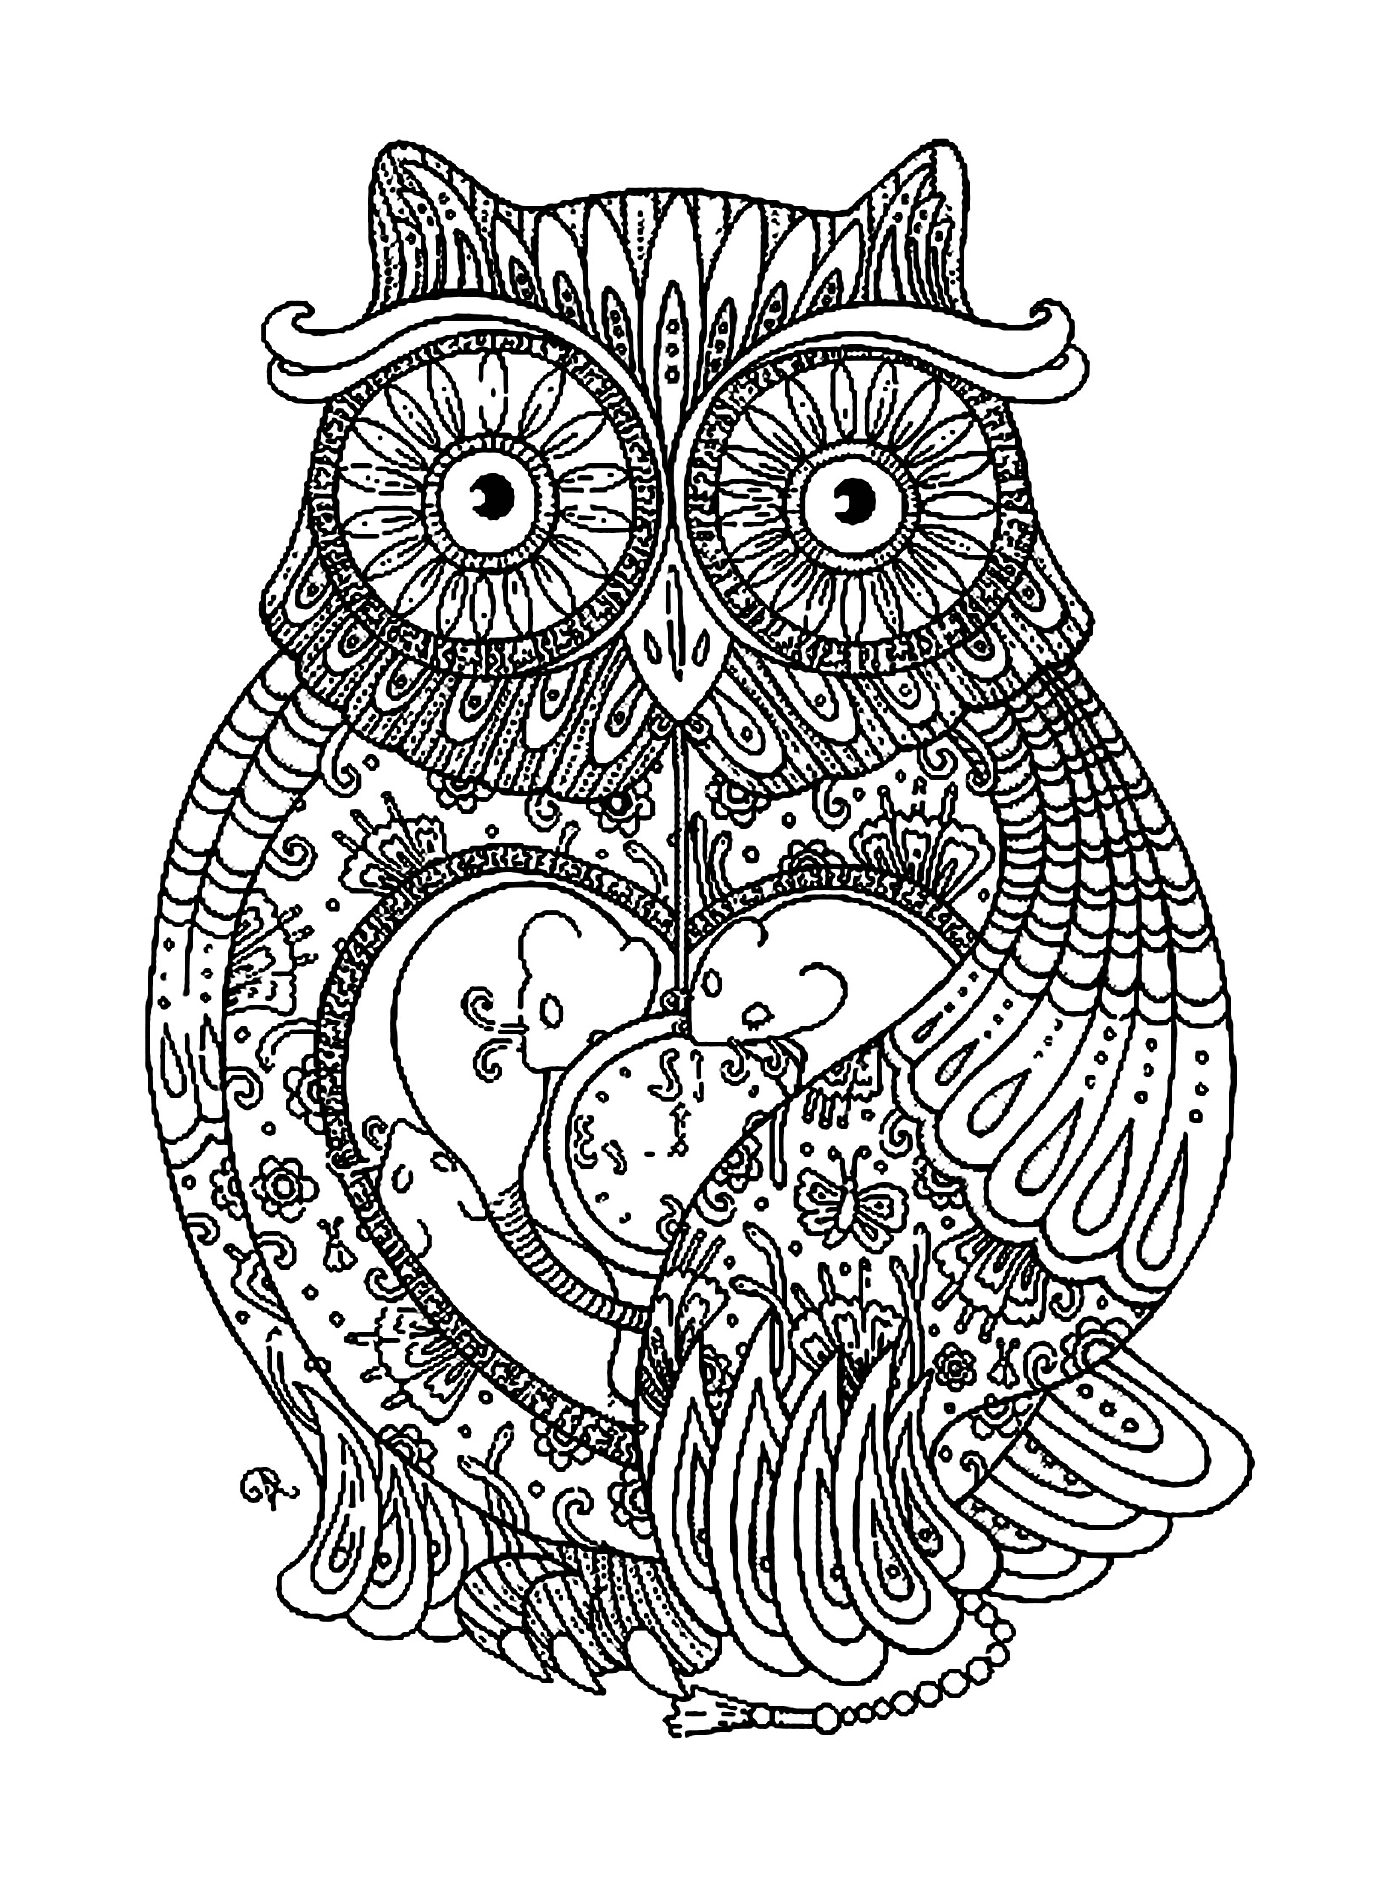  An owl holding a heart in his mouth 